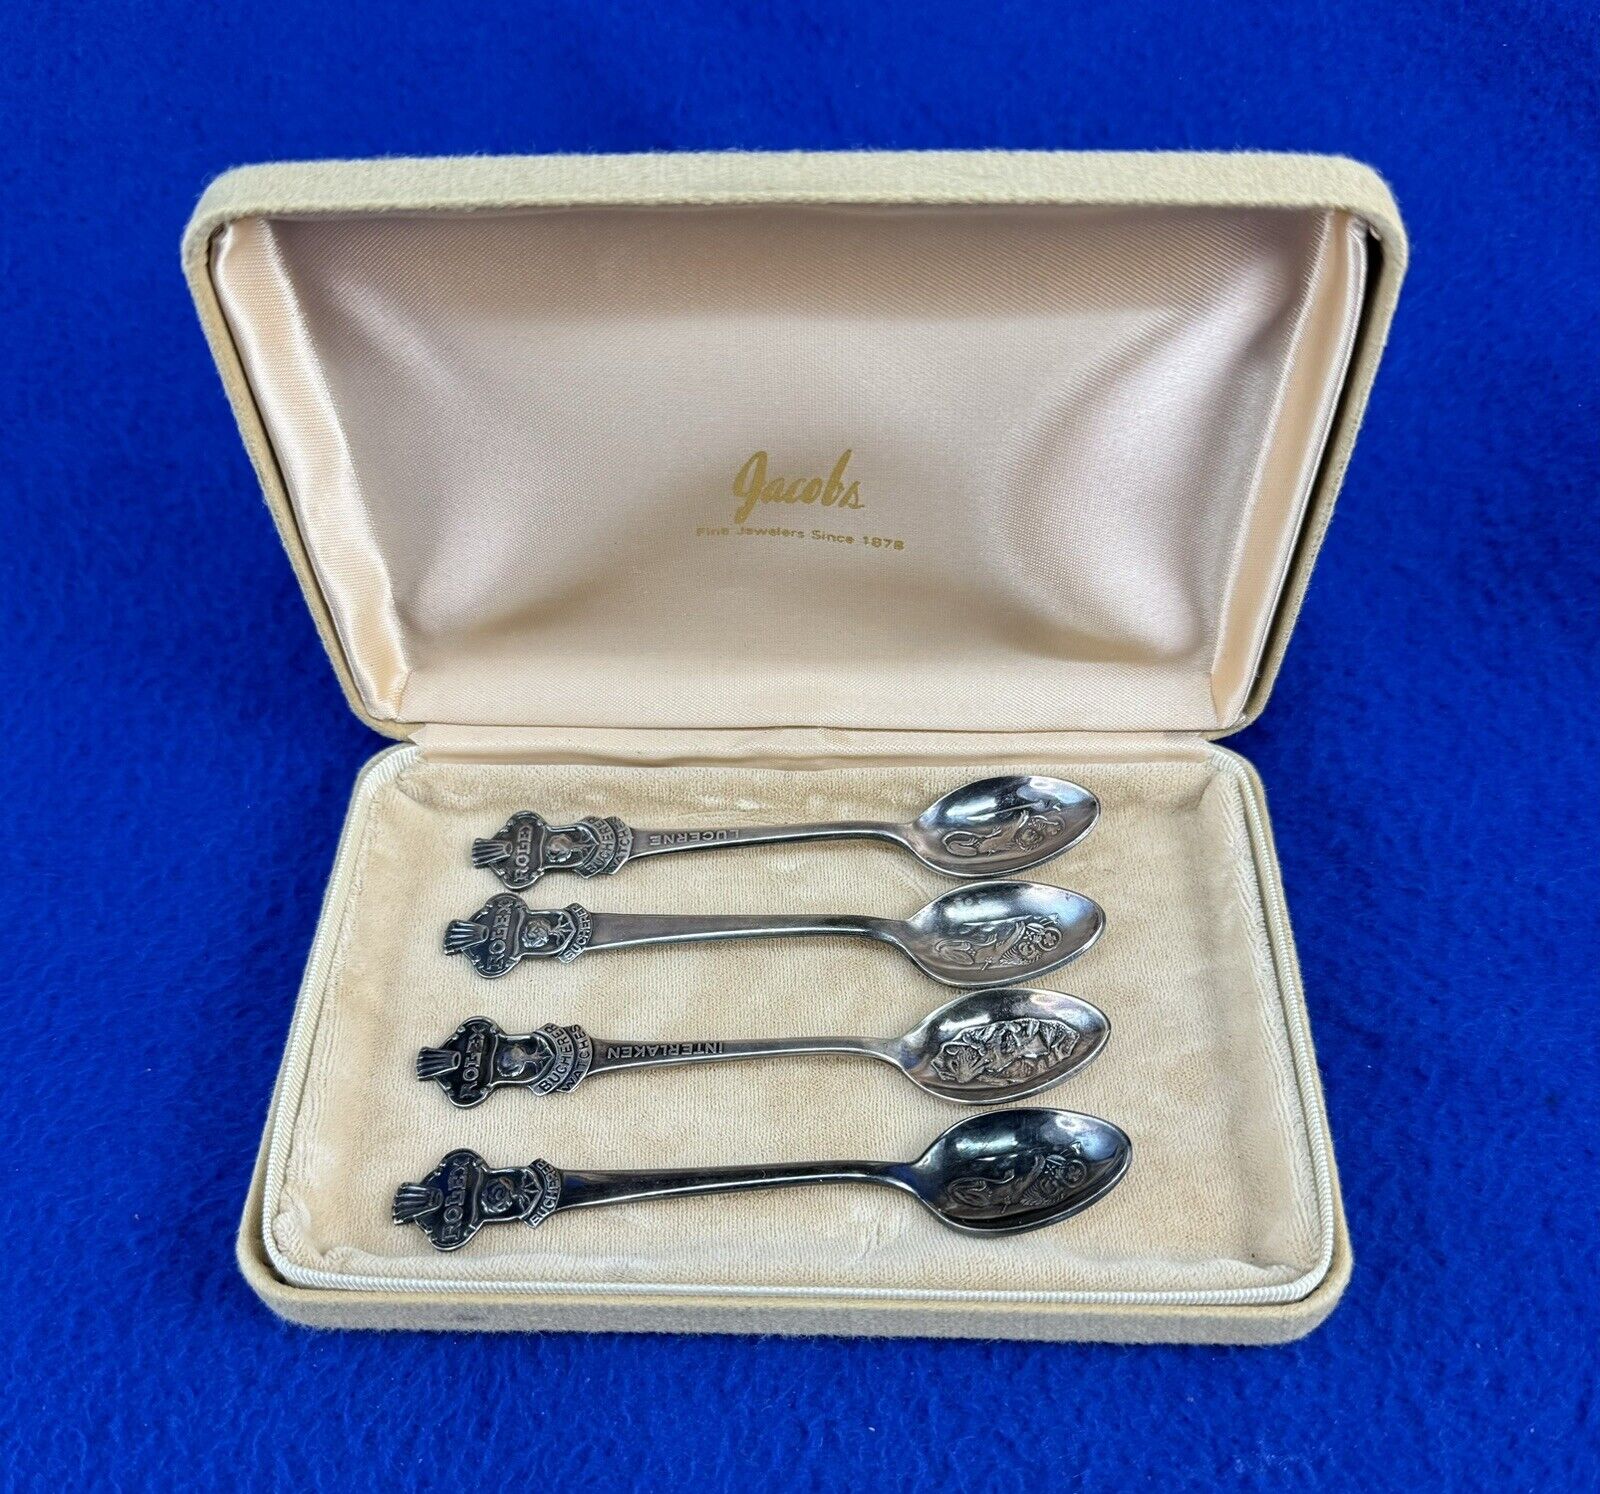 4 Souvenirs Spoons with Rolex Sign In a Box